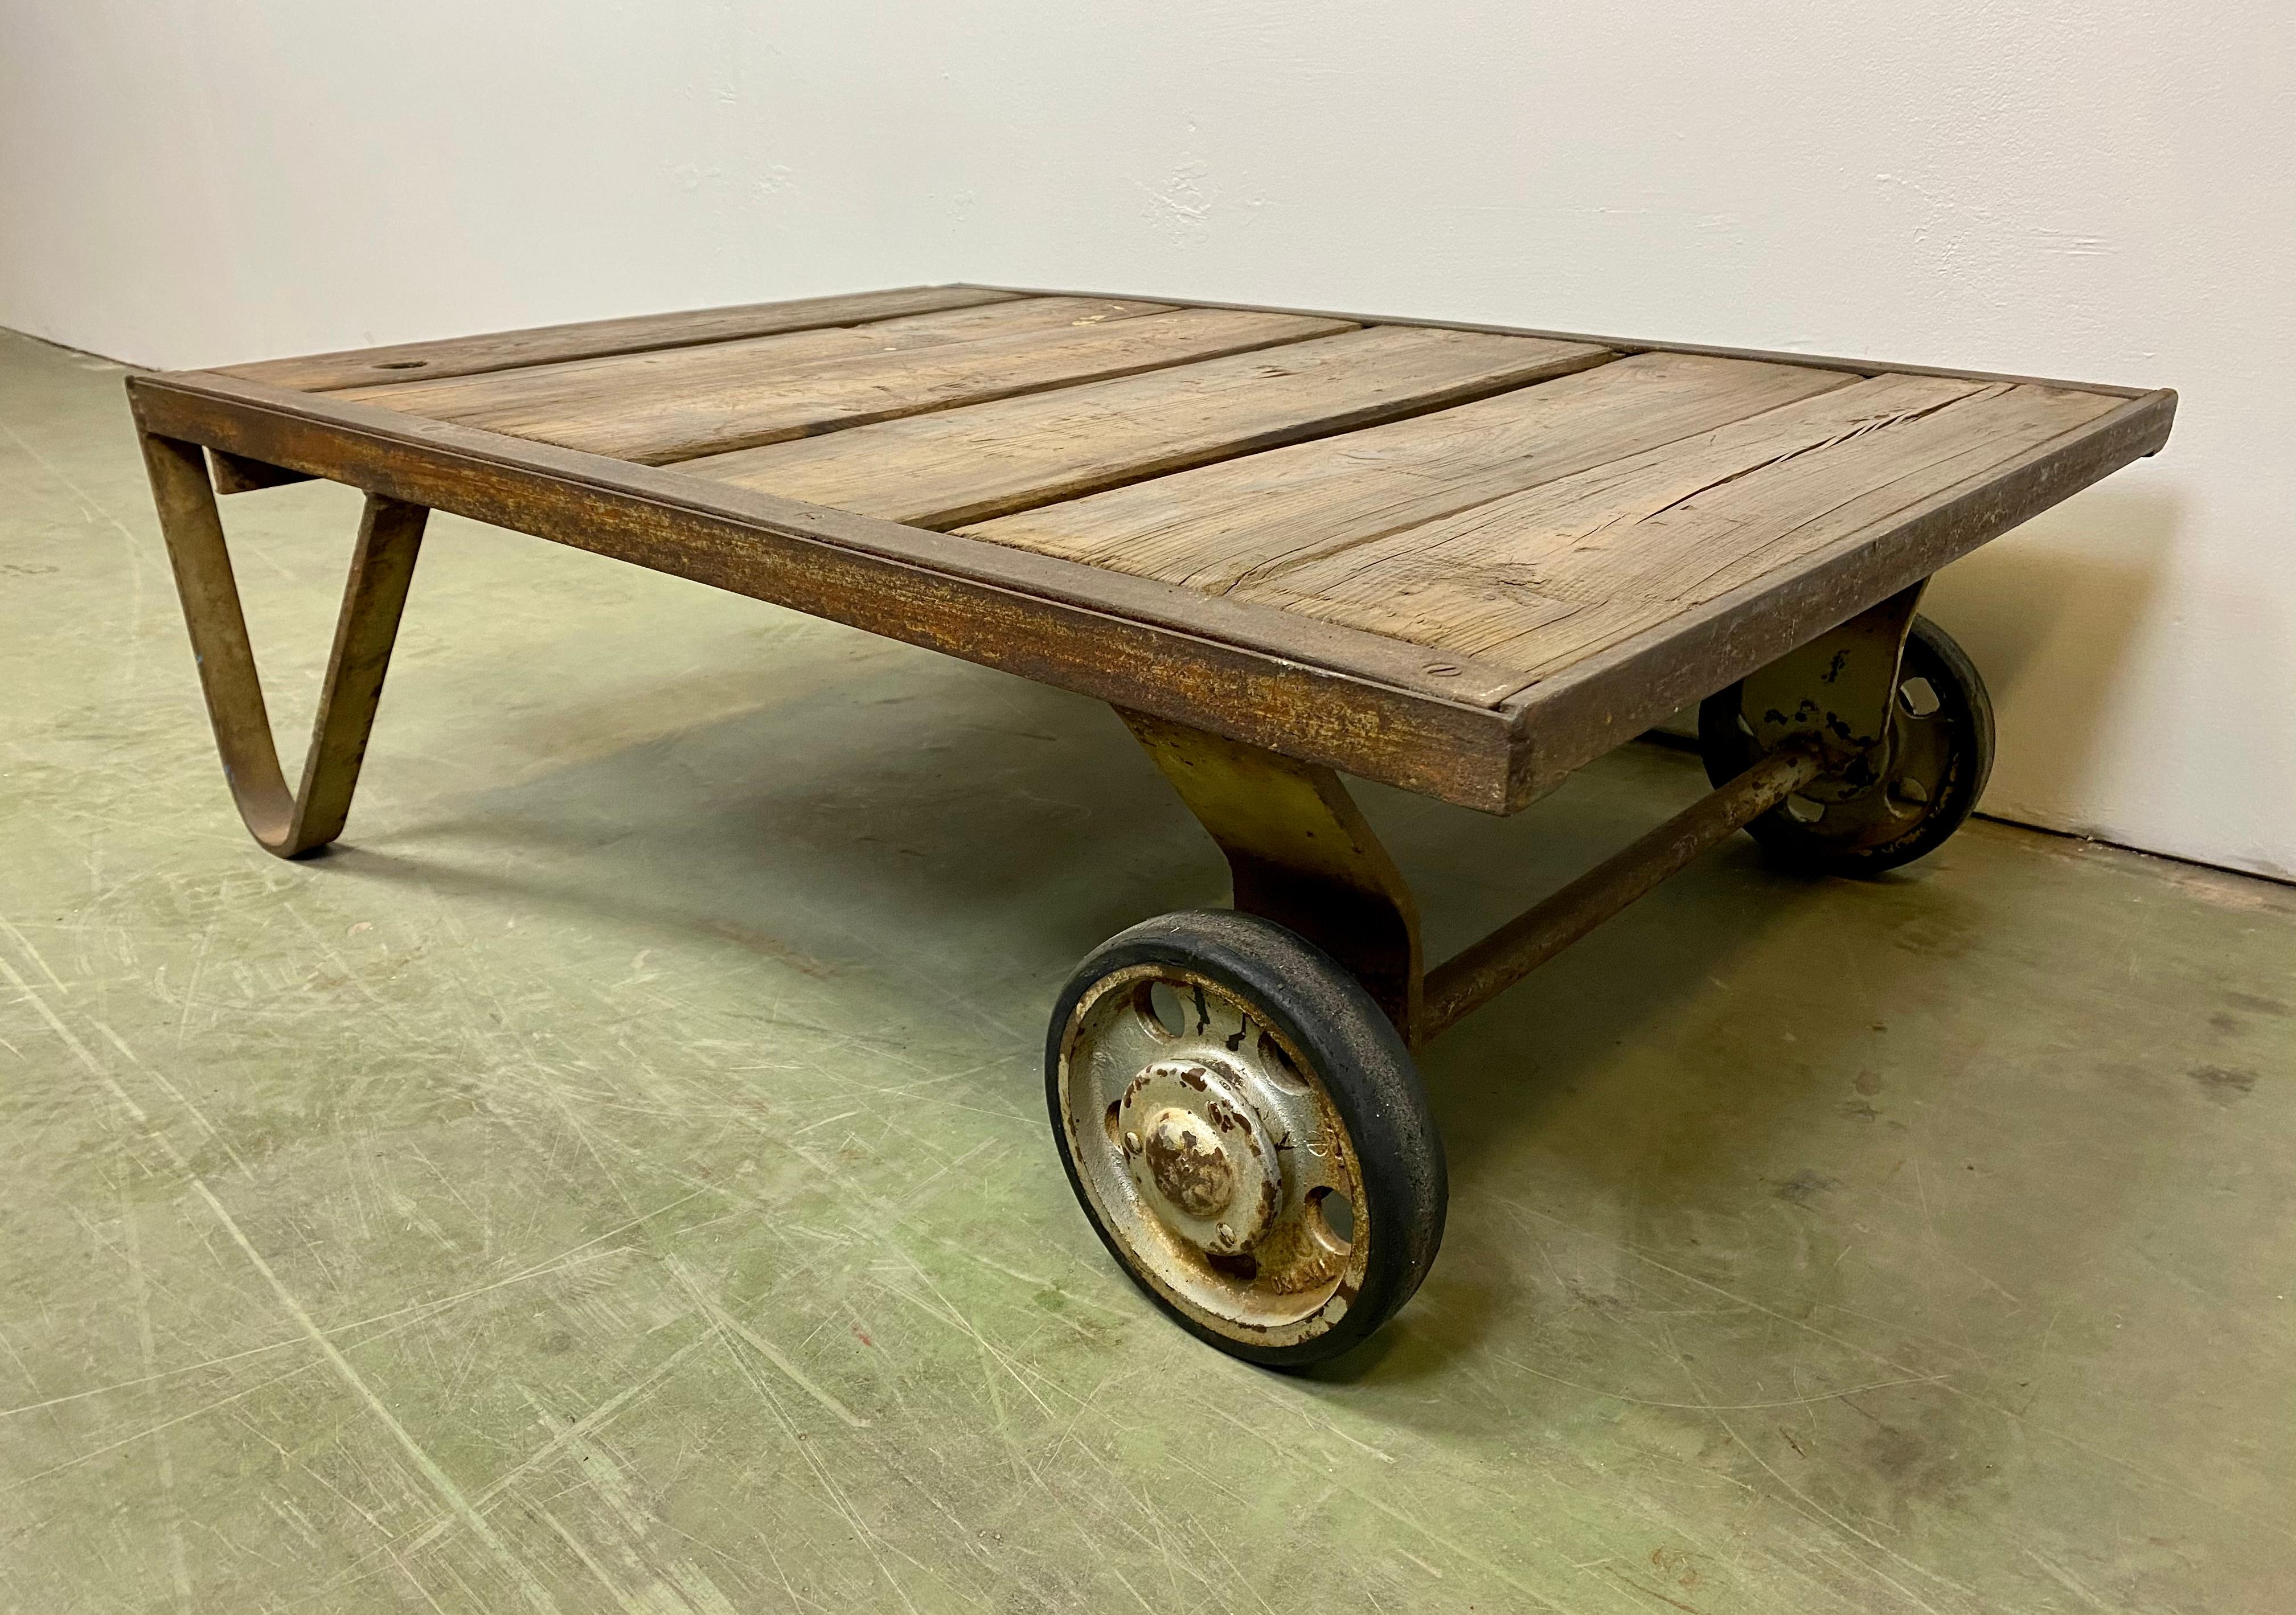 Former pallet truck from a factory now serves as a coffee table. It features a iron construction with two wheels and a solid wooden plate. The weight of the table is 35 kg.